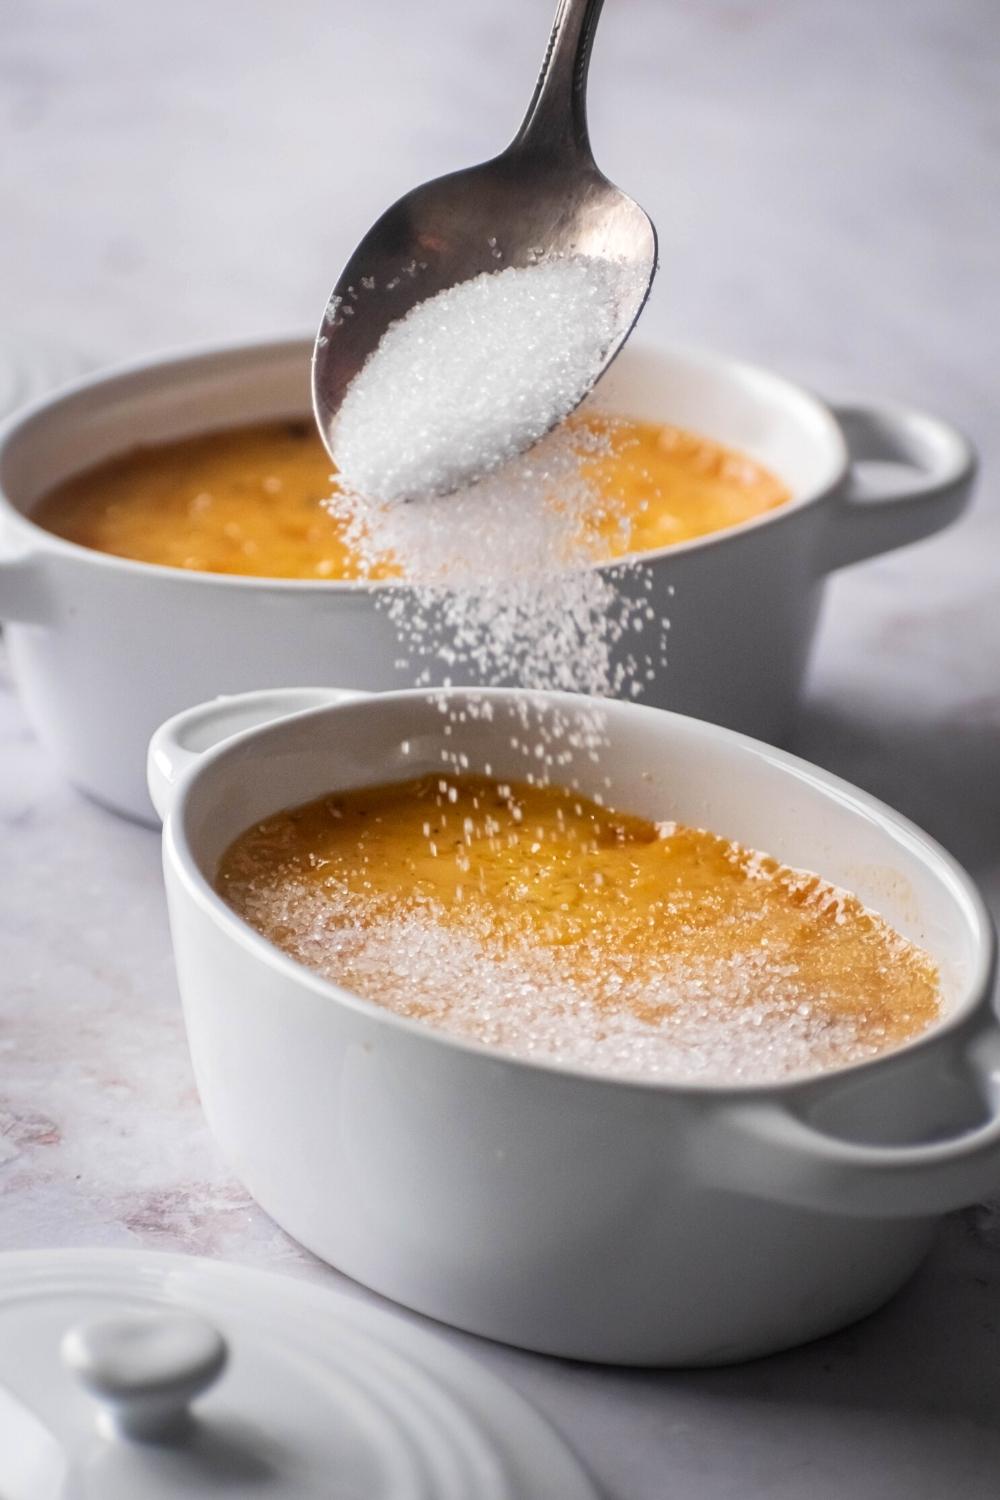 A spoon sprinkling granulated erythritol on top of crème brûlée in a ramekin. There is another ramekin filled with crème brûlée behind it.